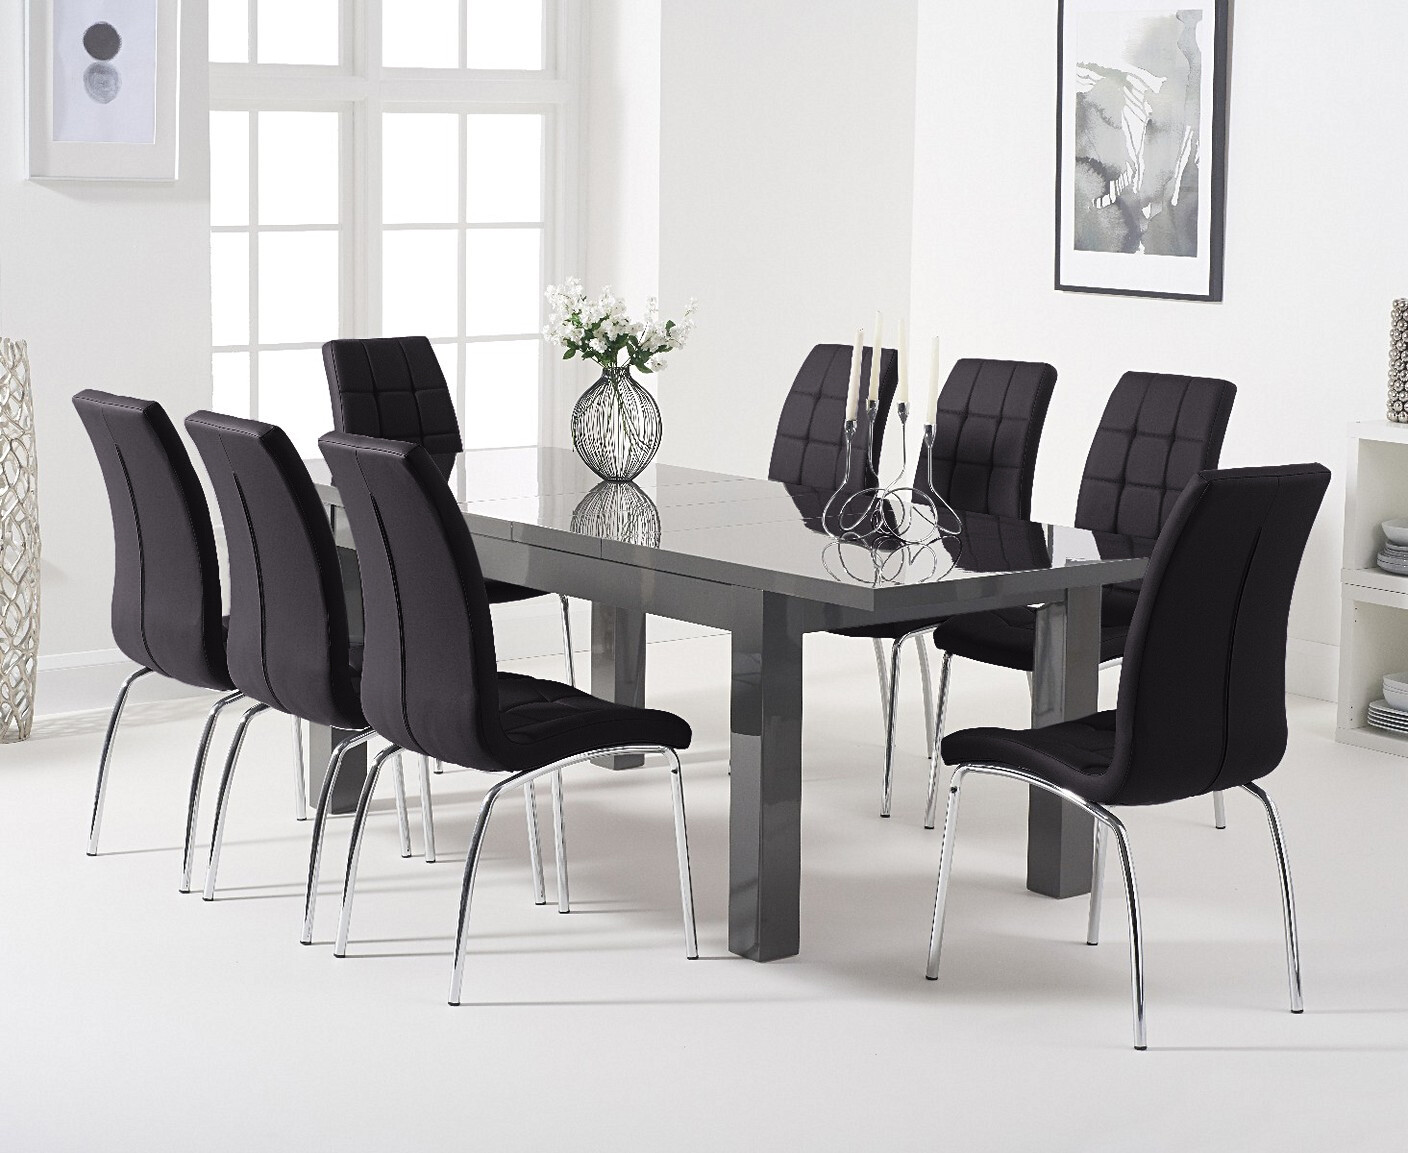 Extending Seattle 160cm Dark Grey High Gloss Dining Table With 4 Grey Enzo Chairs